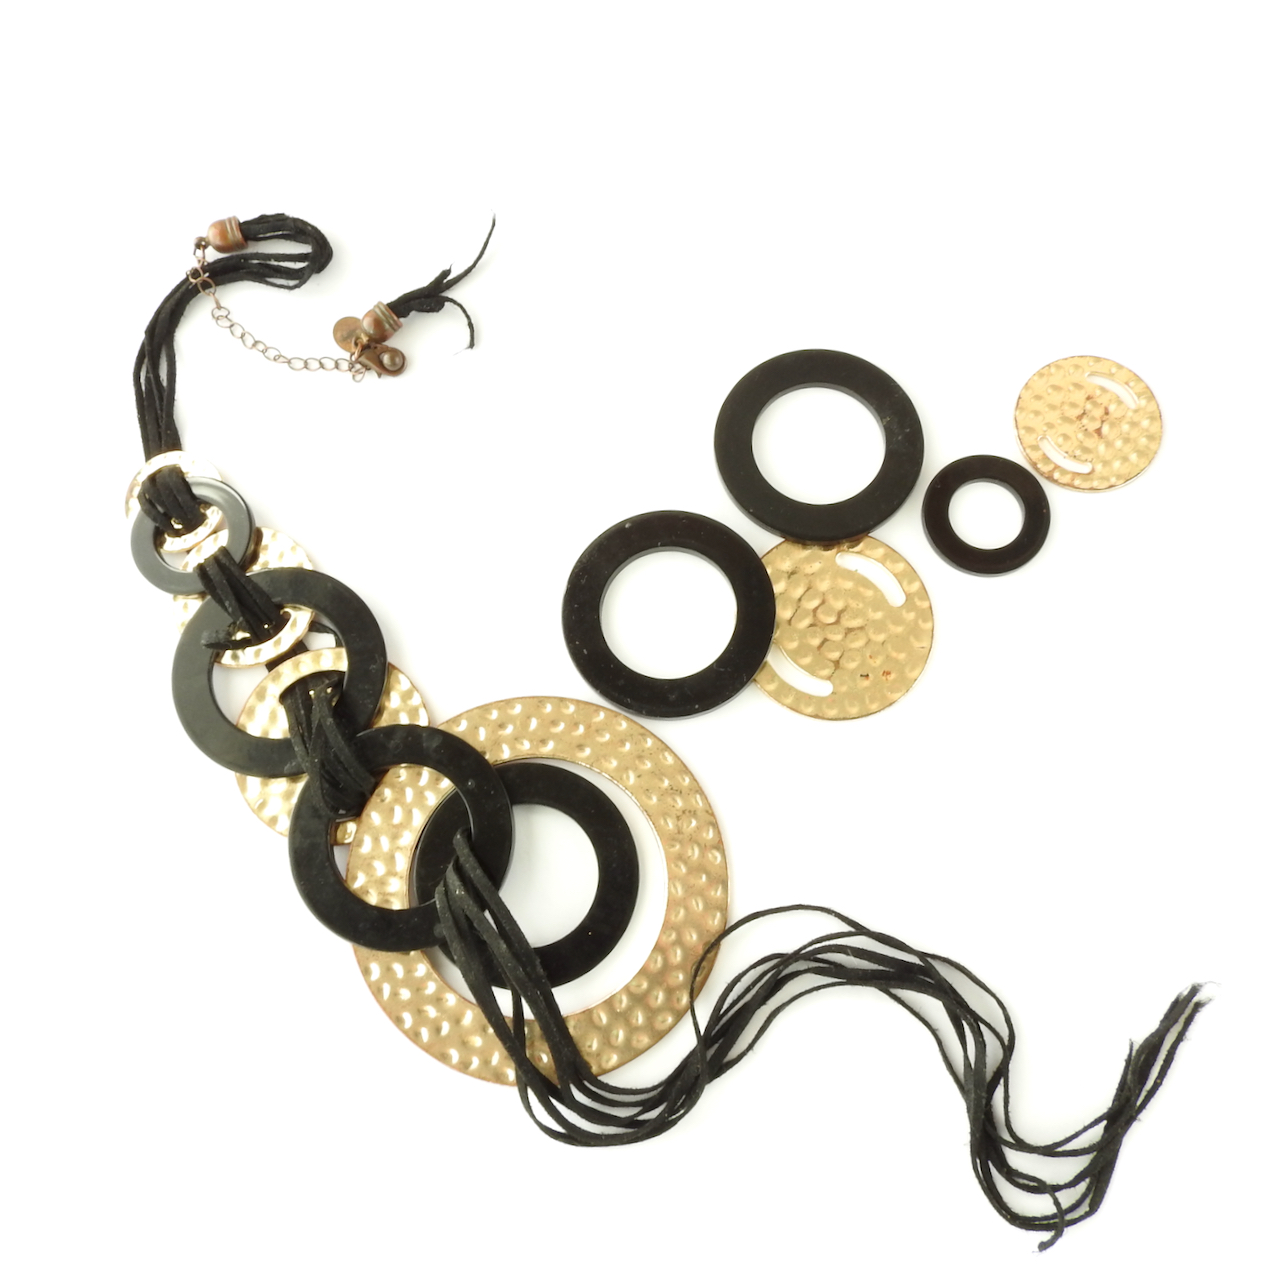 Broken black and gold circle necklace